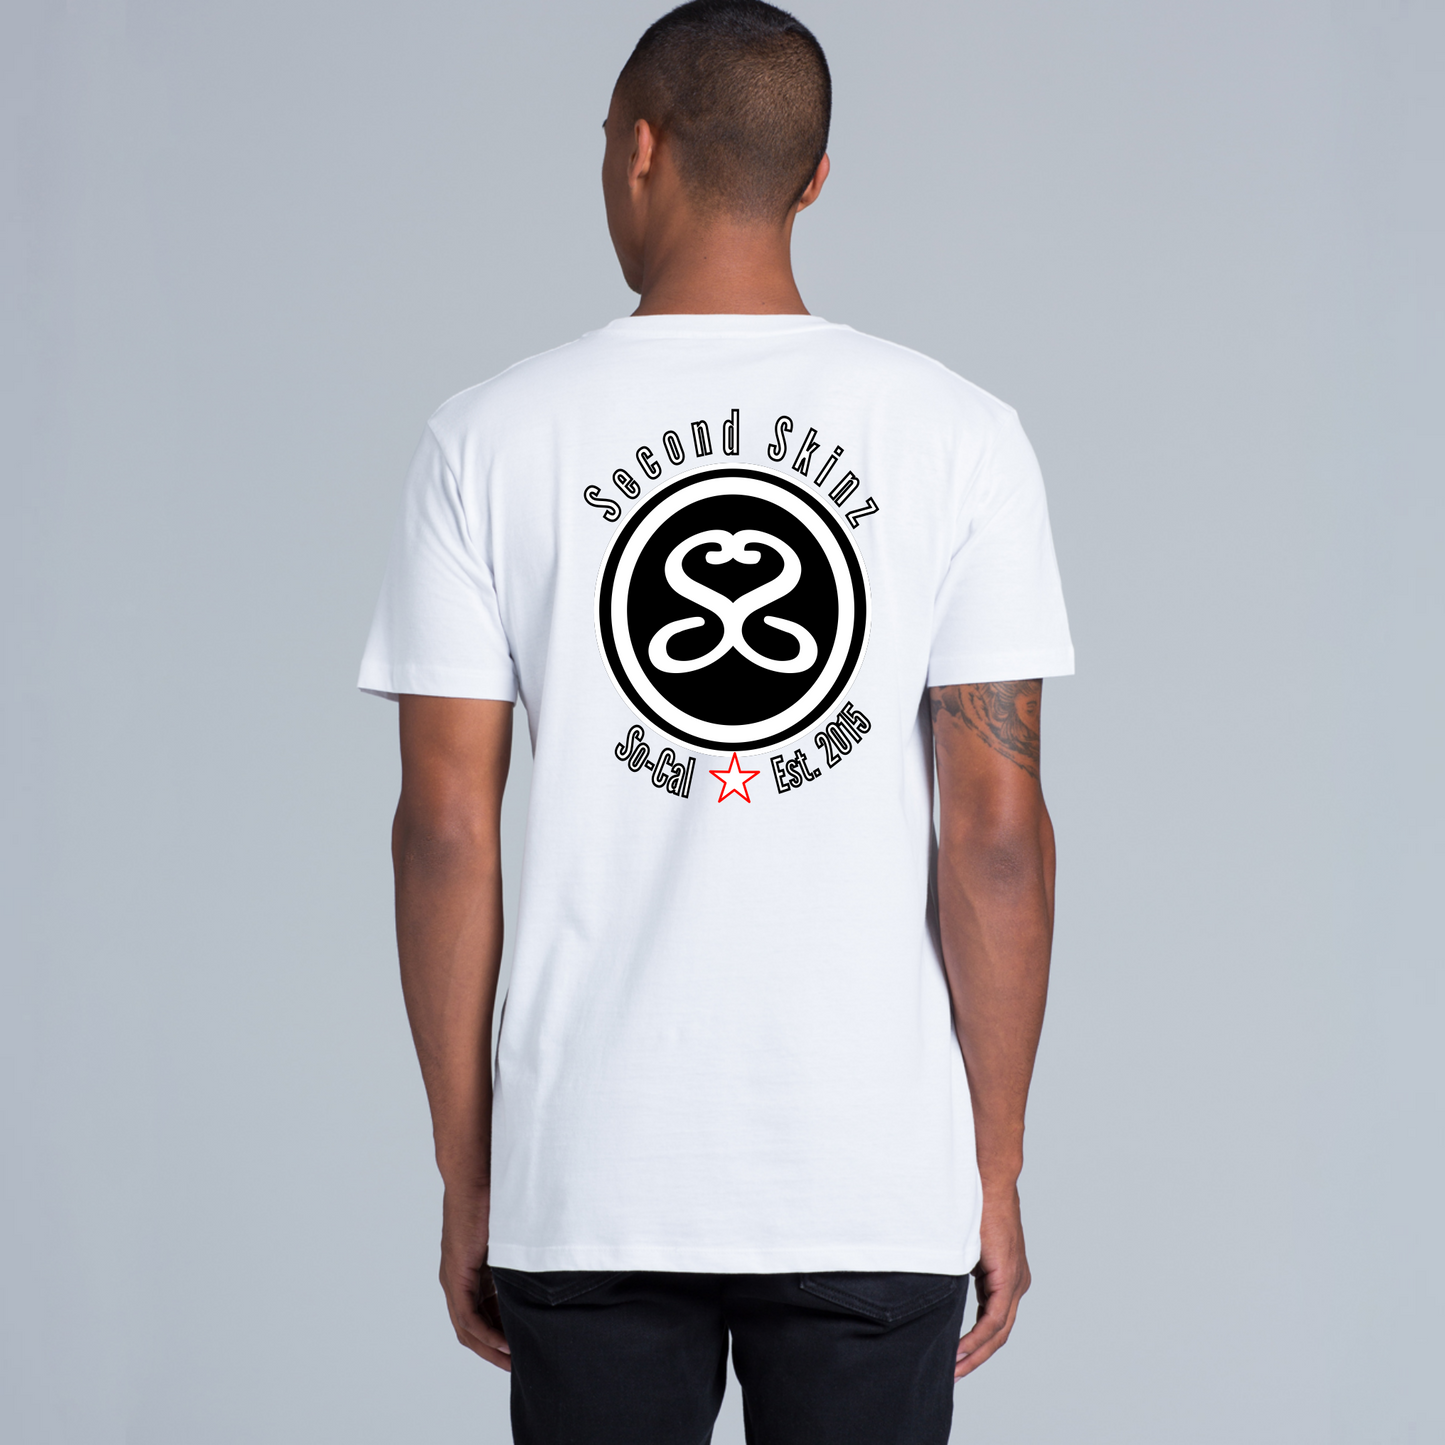 The Ultimate Second Skinz T-Shirt in White.